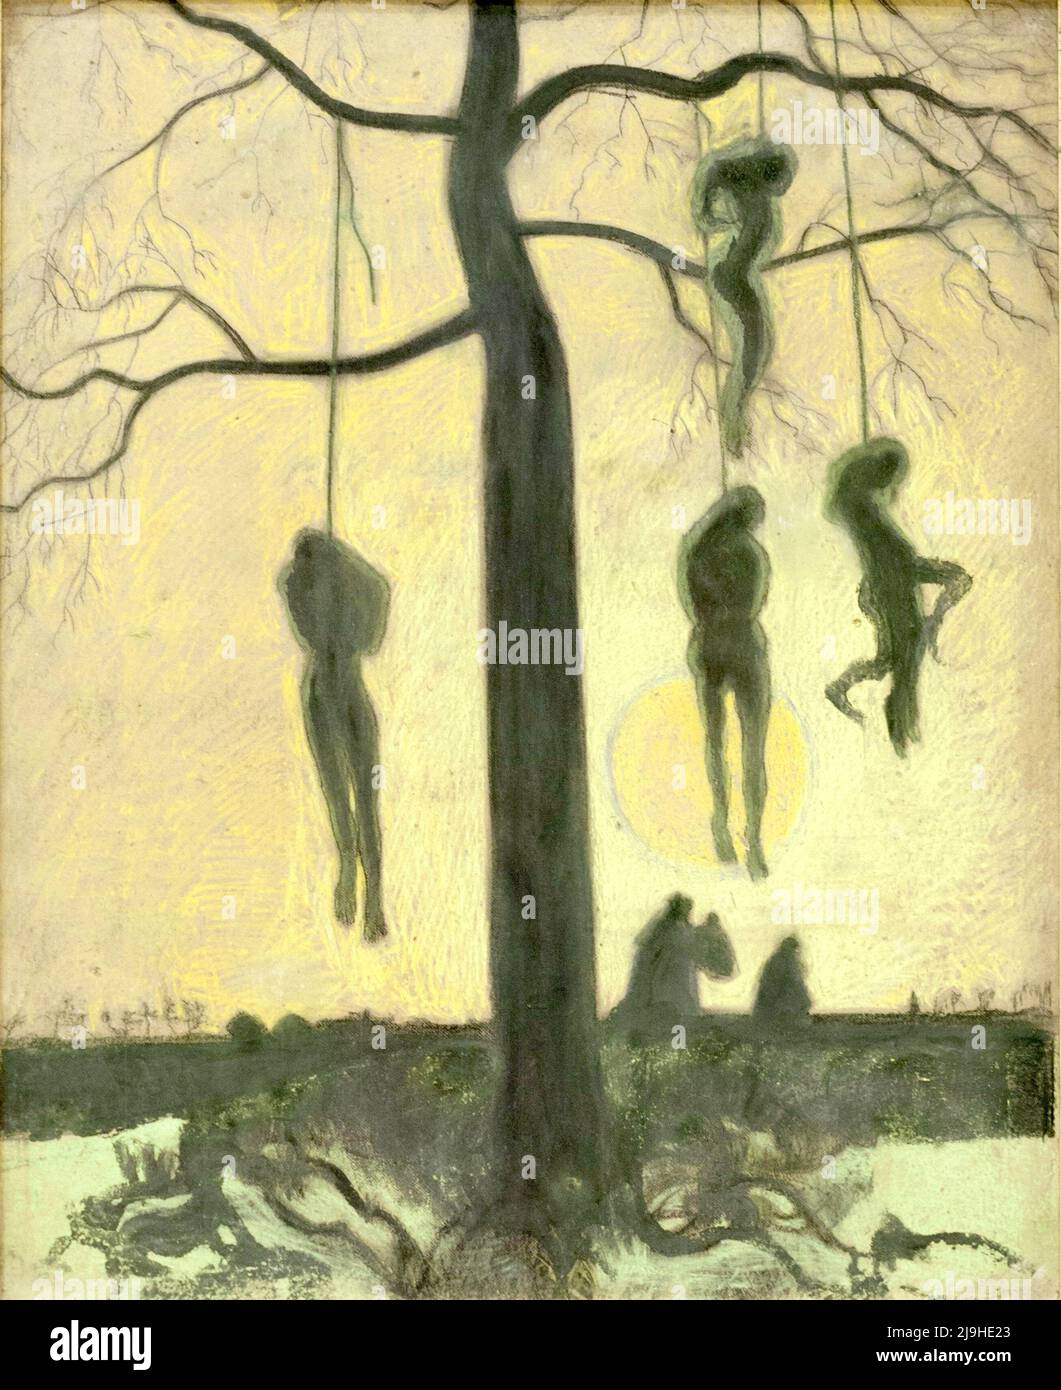 Léon Spilliaert - The Hanged - Four human bodies hang lynched from a tree in black silhouettes; one figure works below as two others leave on horseback. Stock Photo